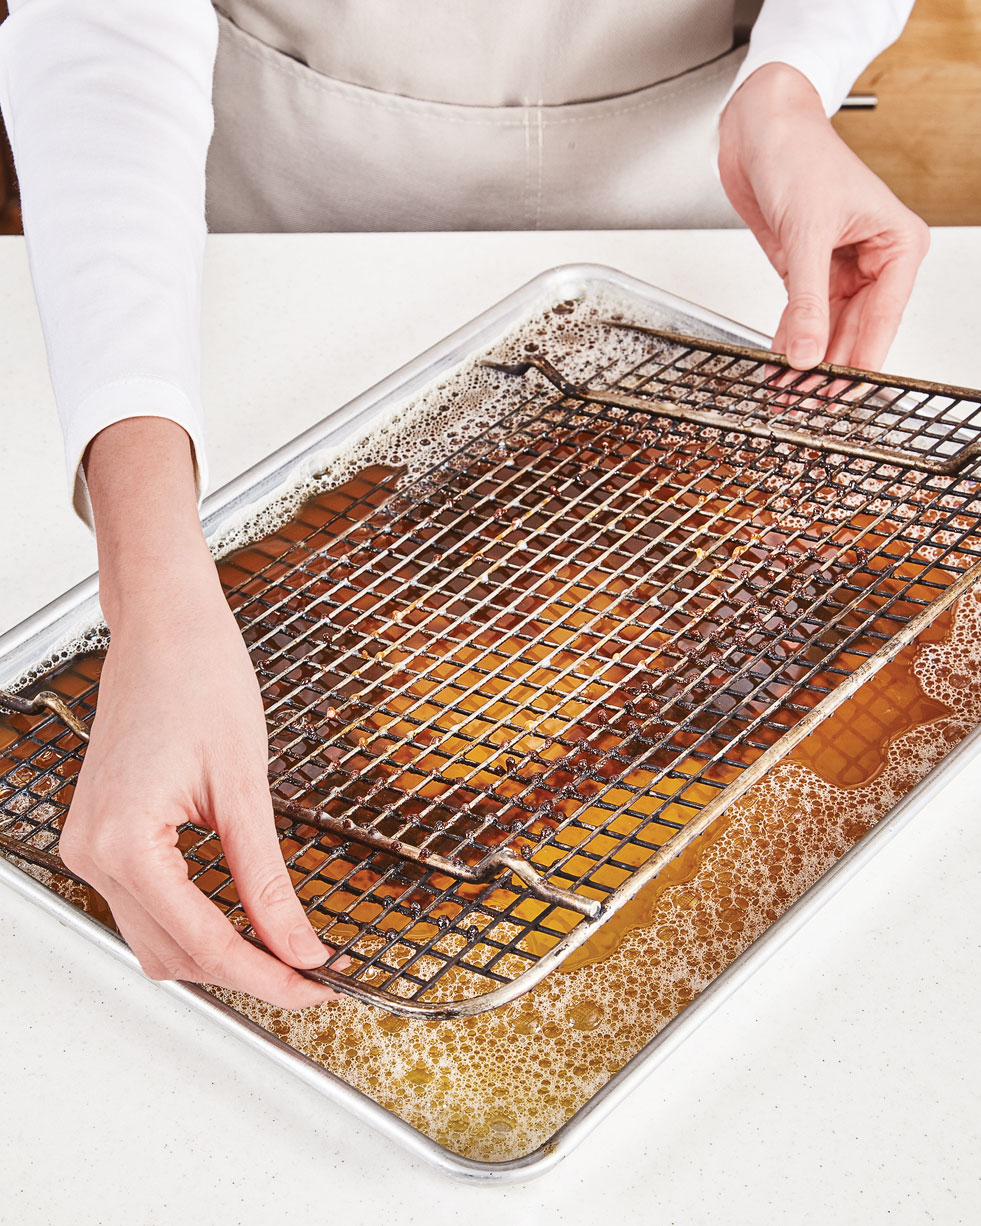 How to clean wire baking and cooling racks - The Washington Post